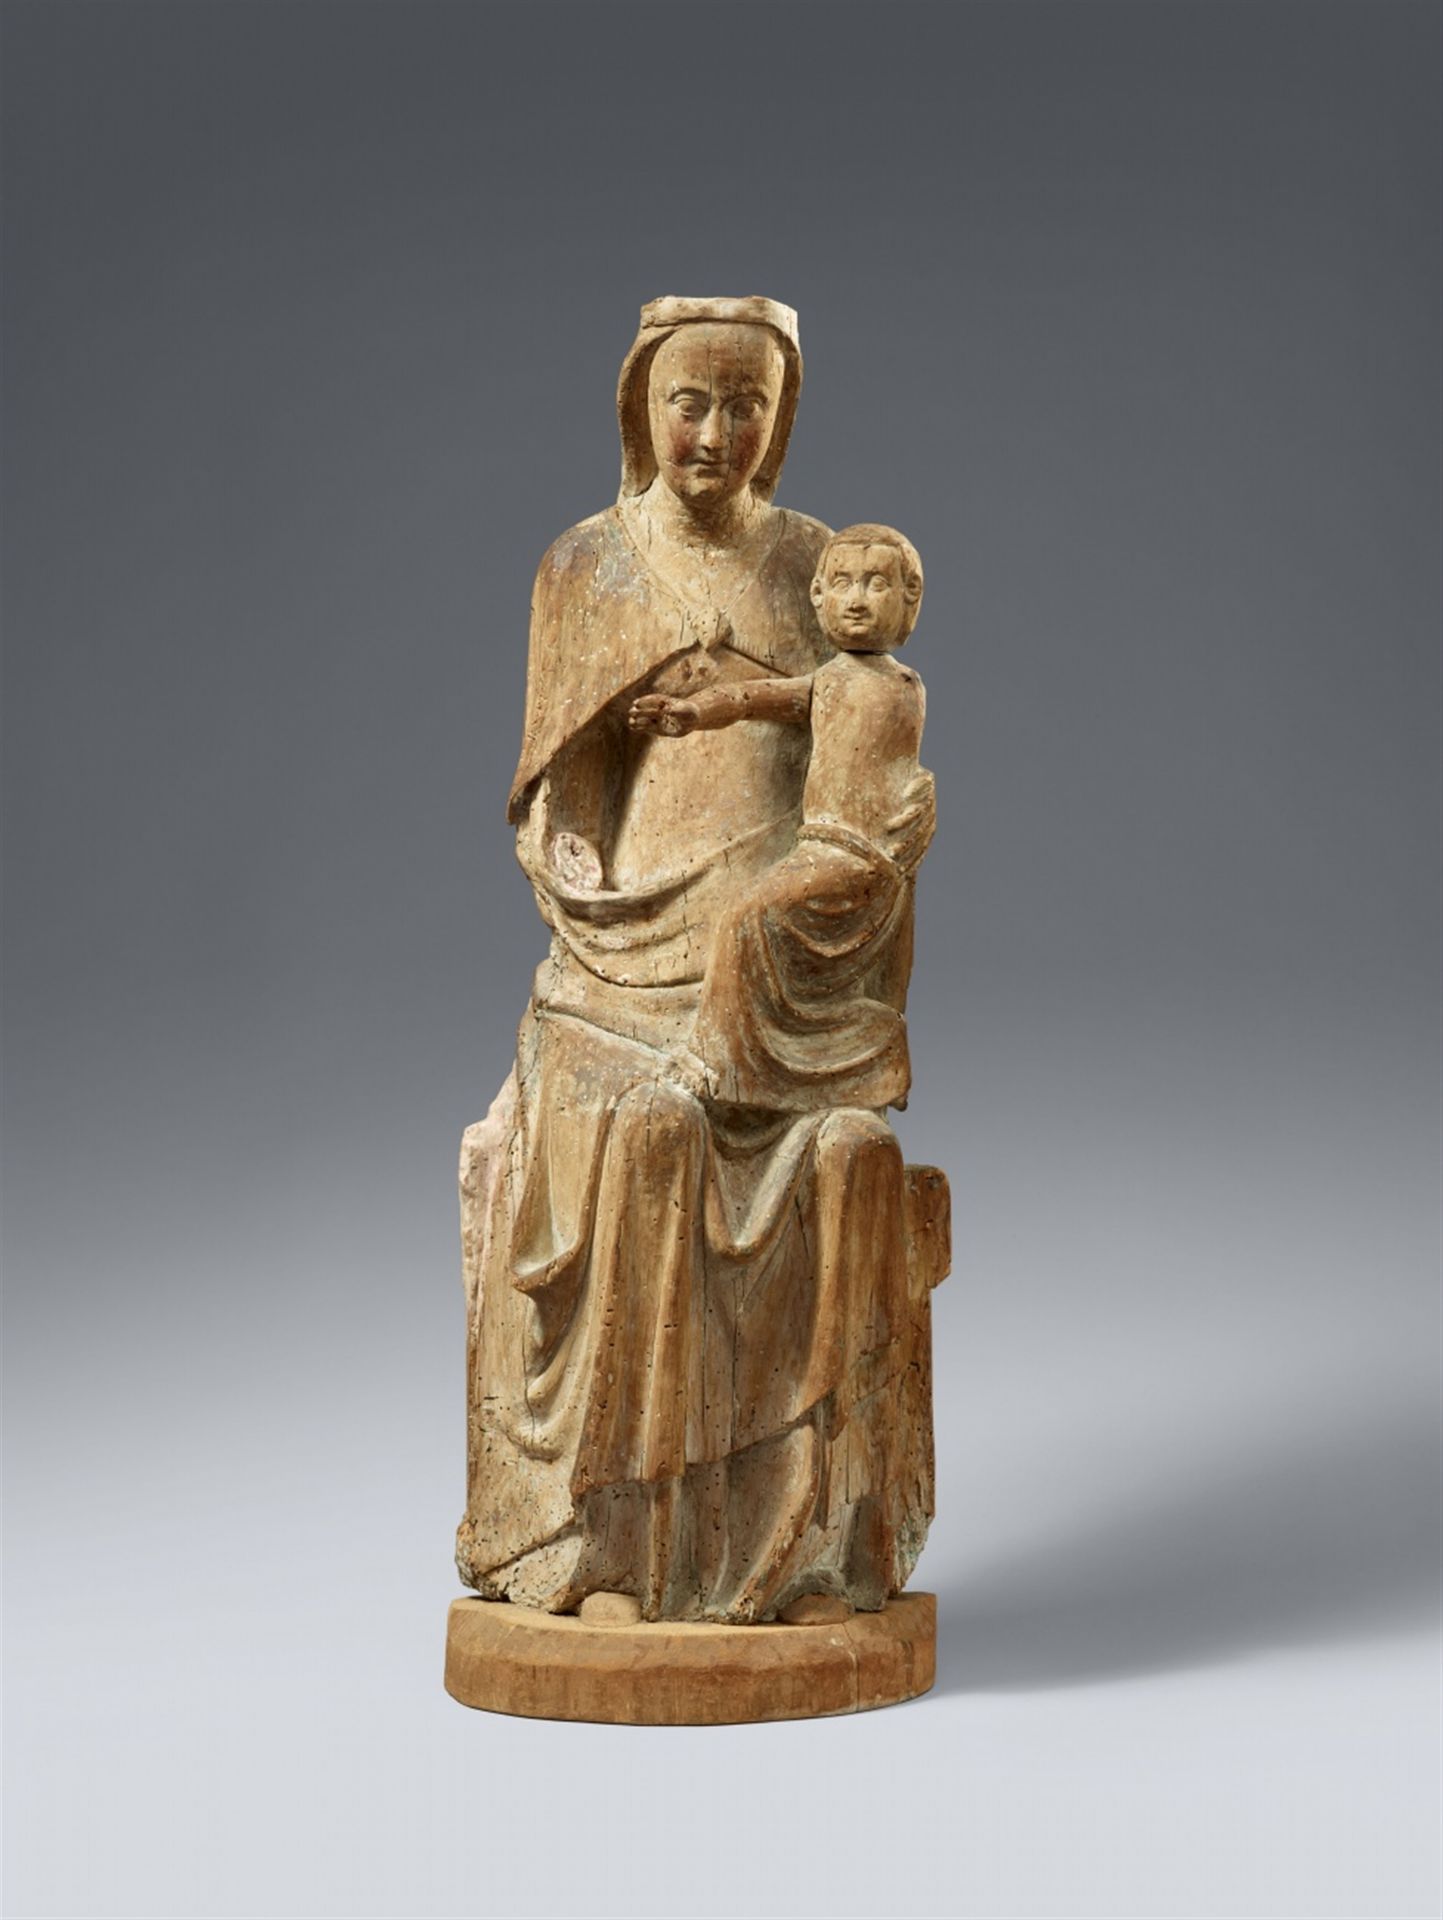 A carved wood figure of the Virgin Enthroned, presumably Maasland, 1st half 14th century